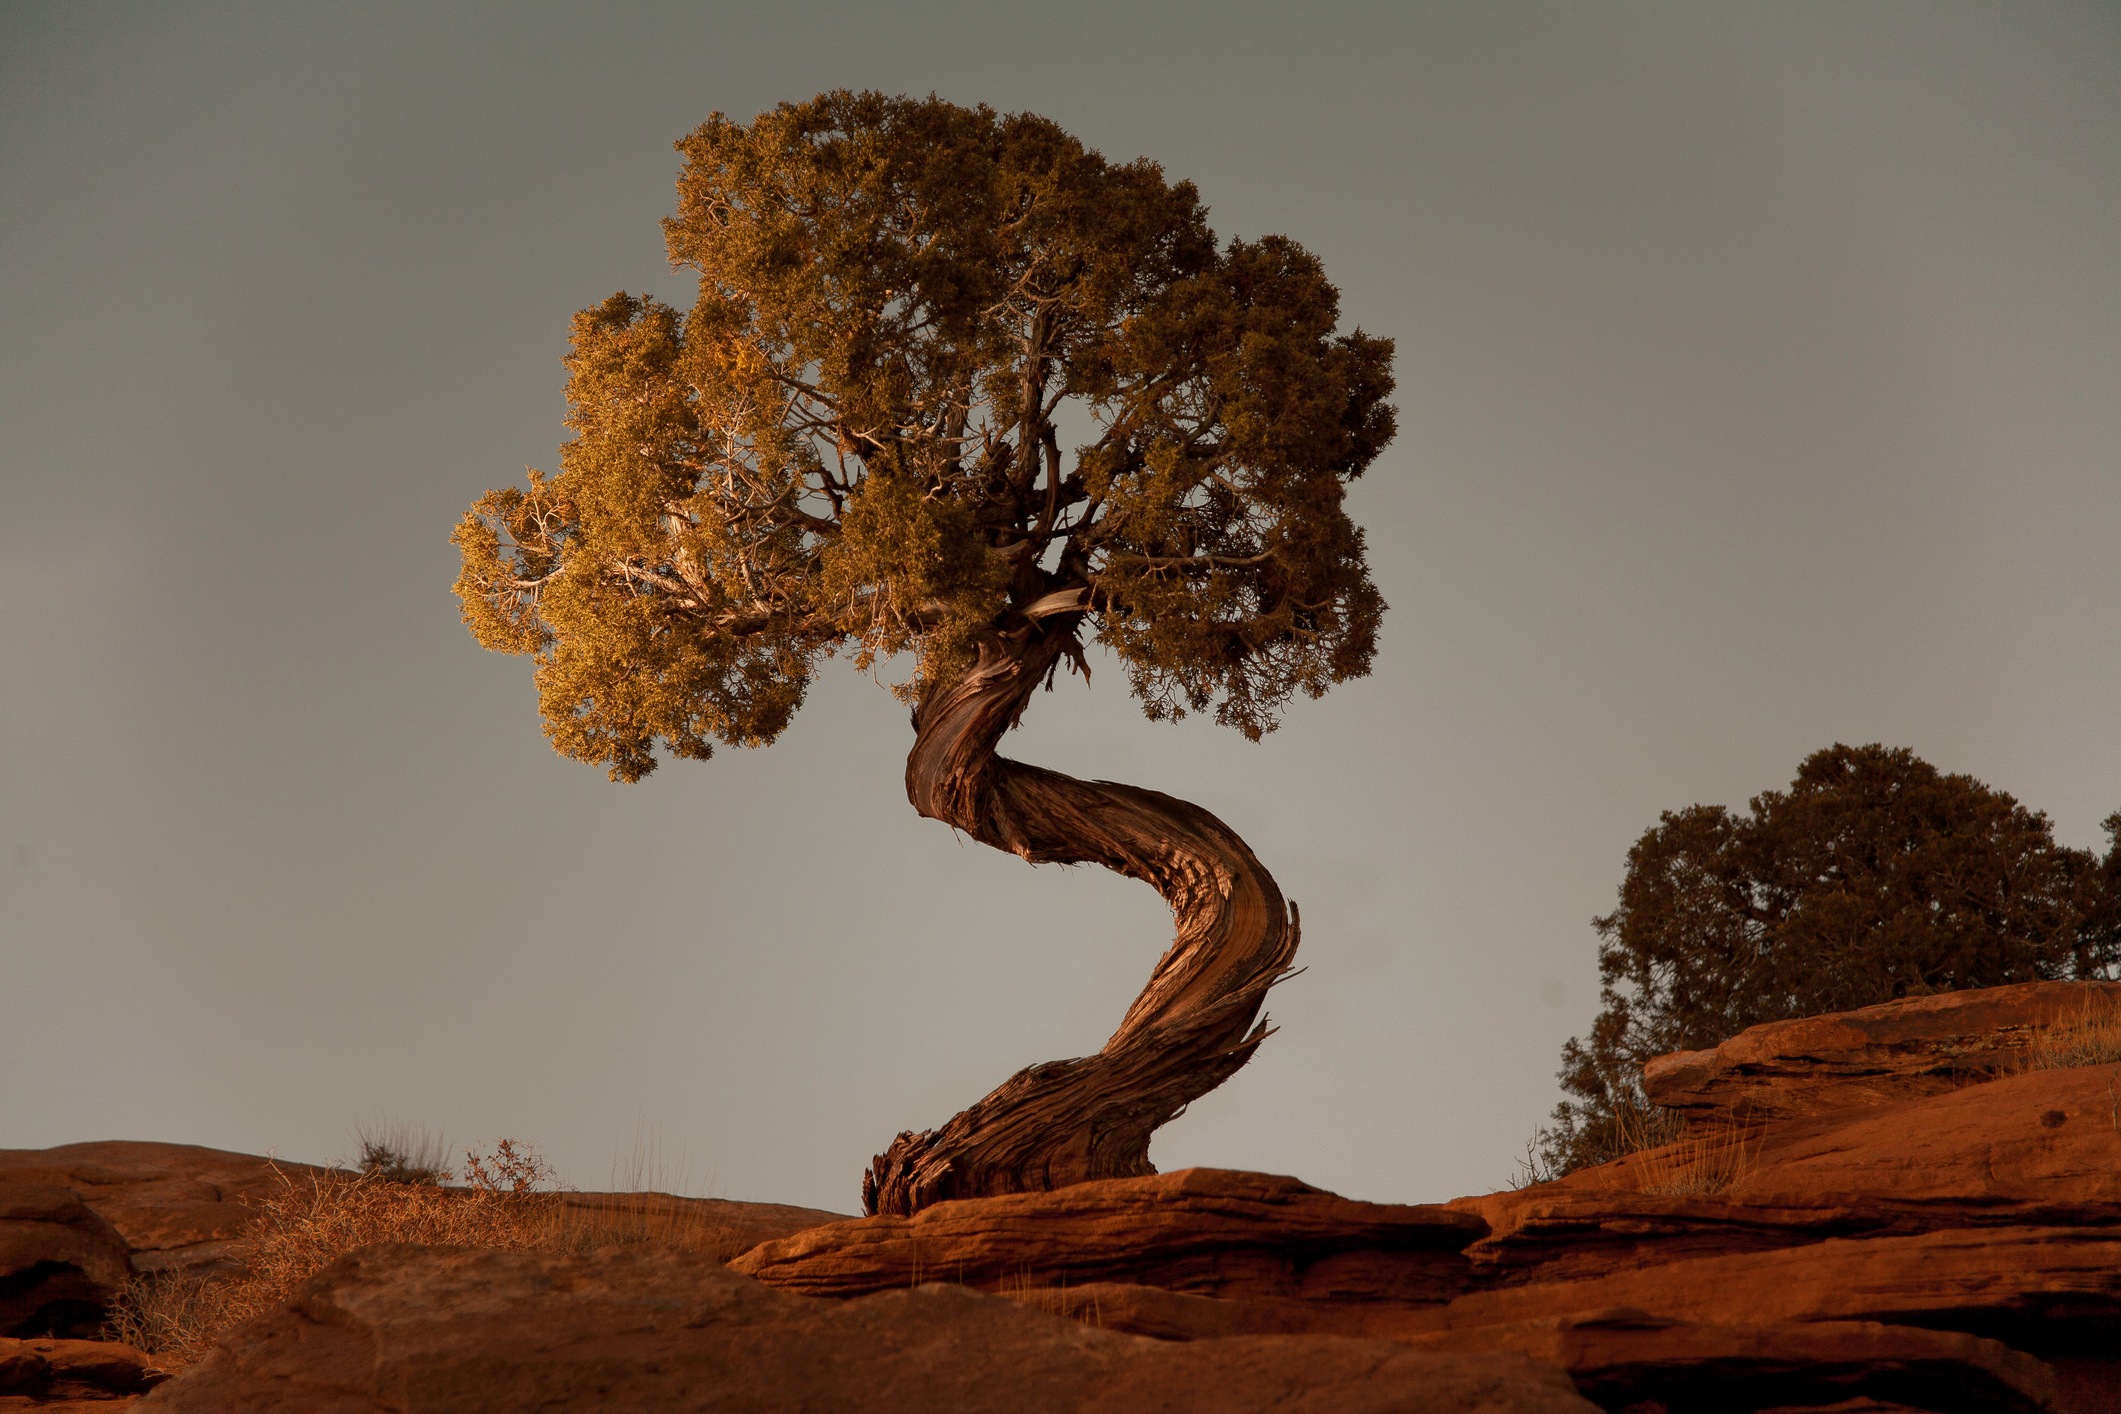 Stock Images. A spiral juniper tree at Deadhorse Point State Park near Moab, Utah